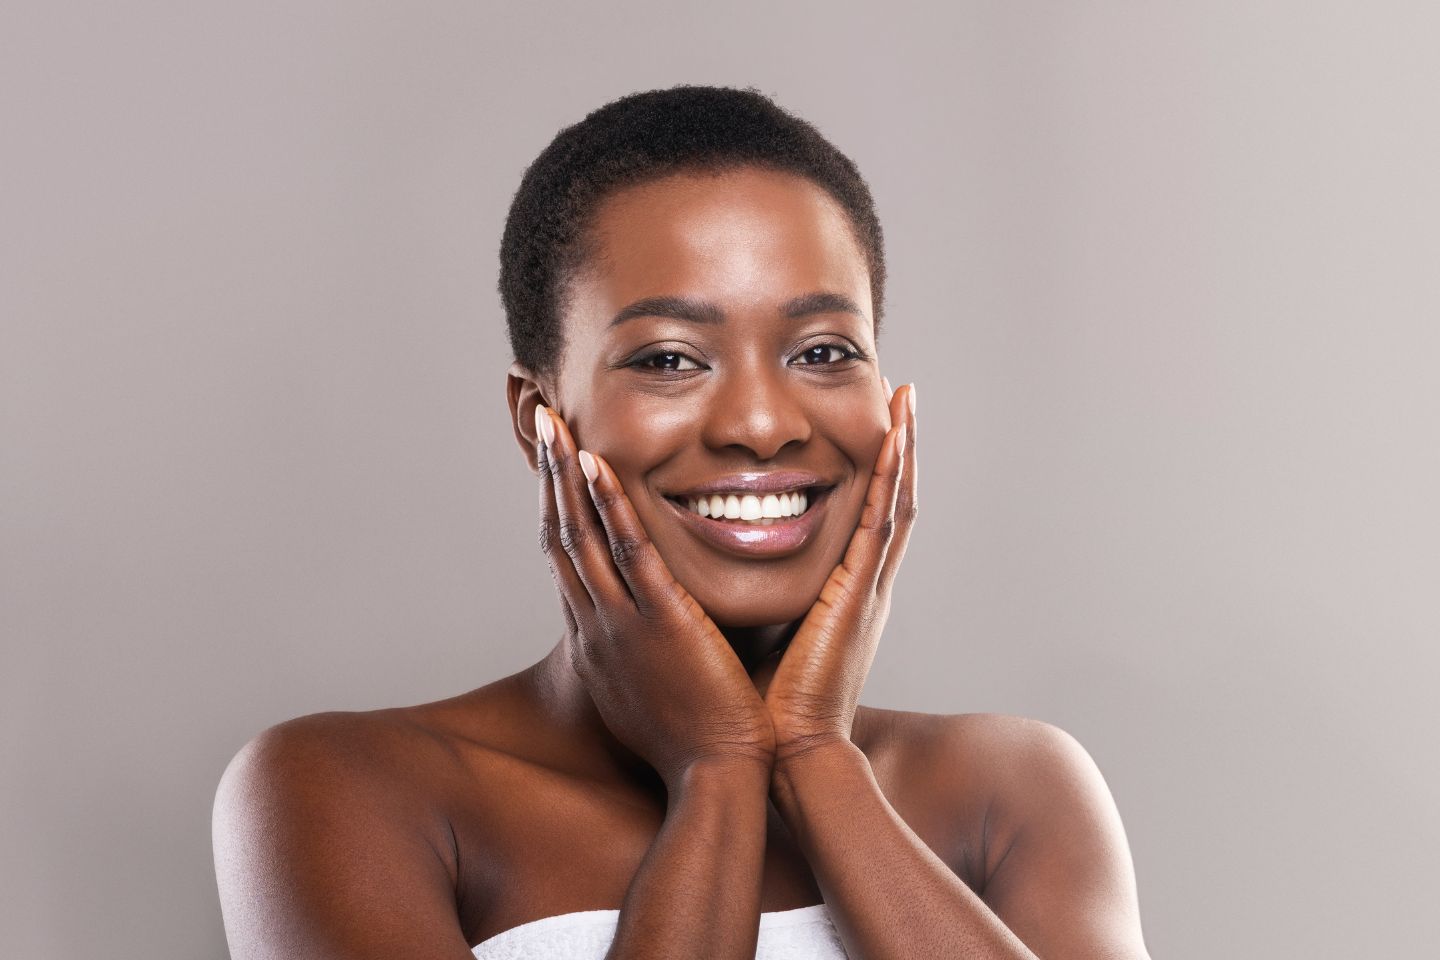 A young black woman smiling with her hands on her face.